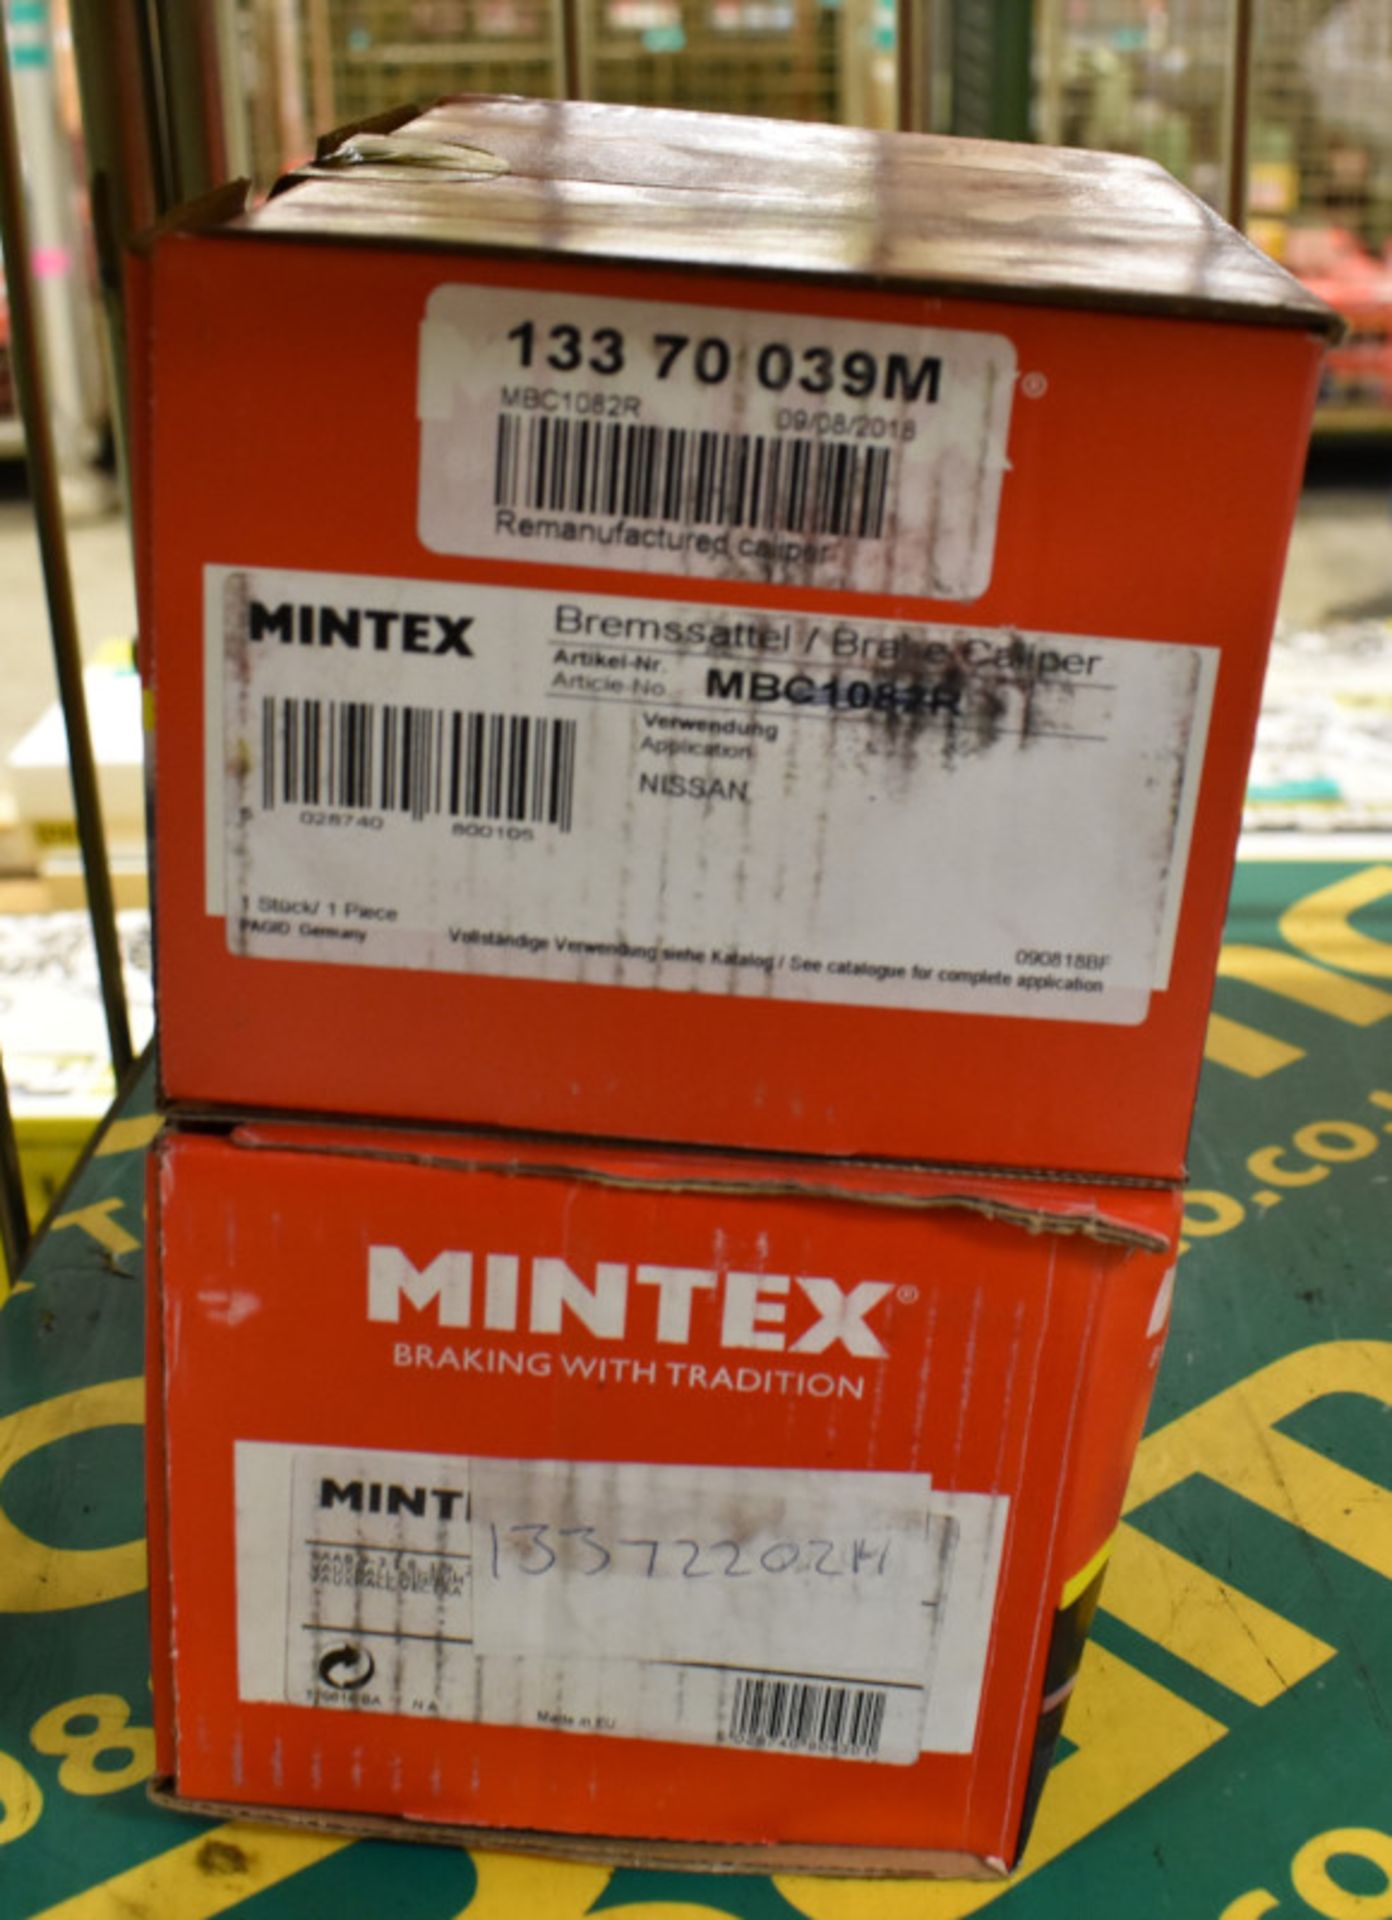 Mintex 133 70 039M & 13372202M - please see pictures for examples of make and model number - Image 2 of 2